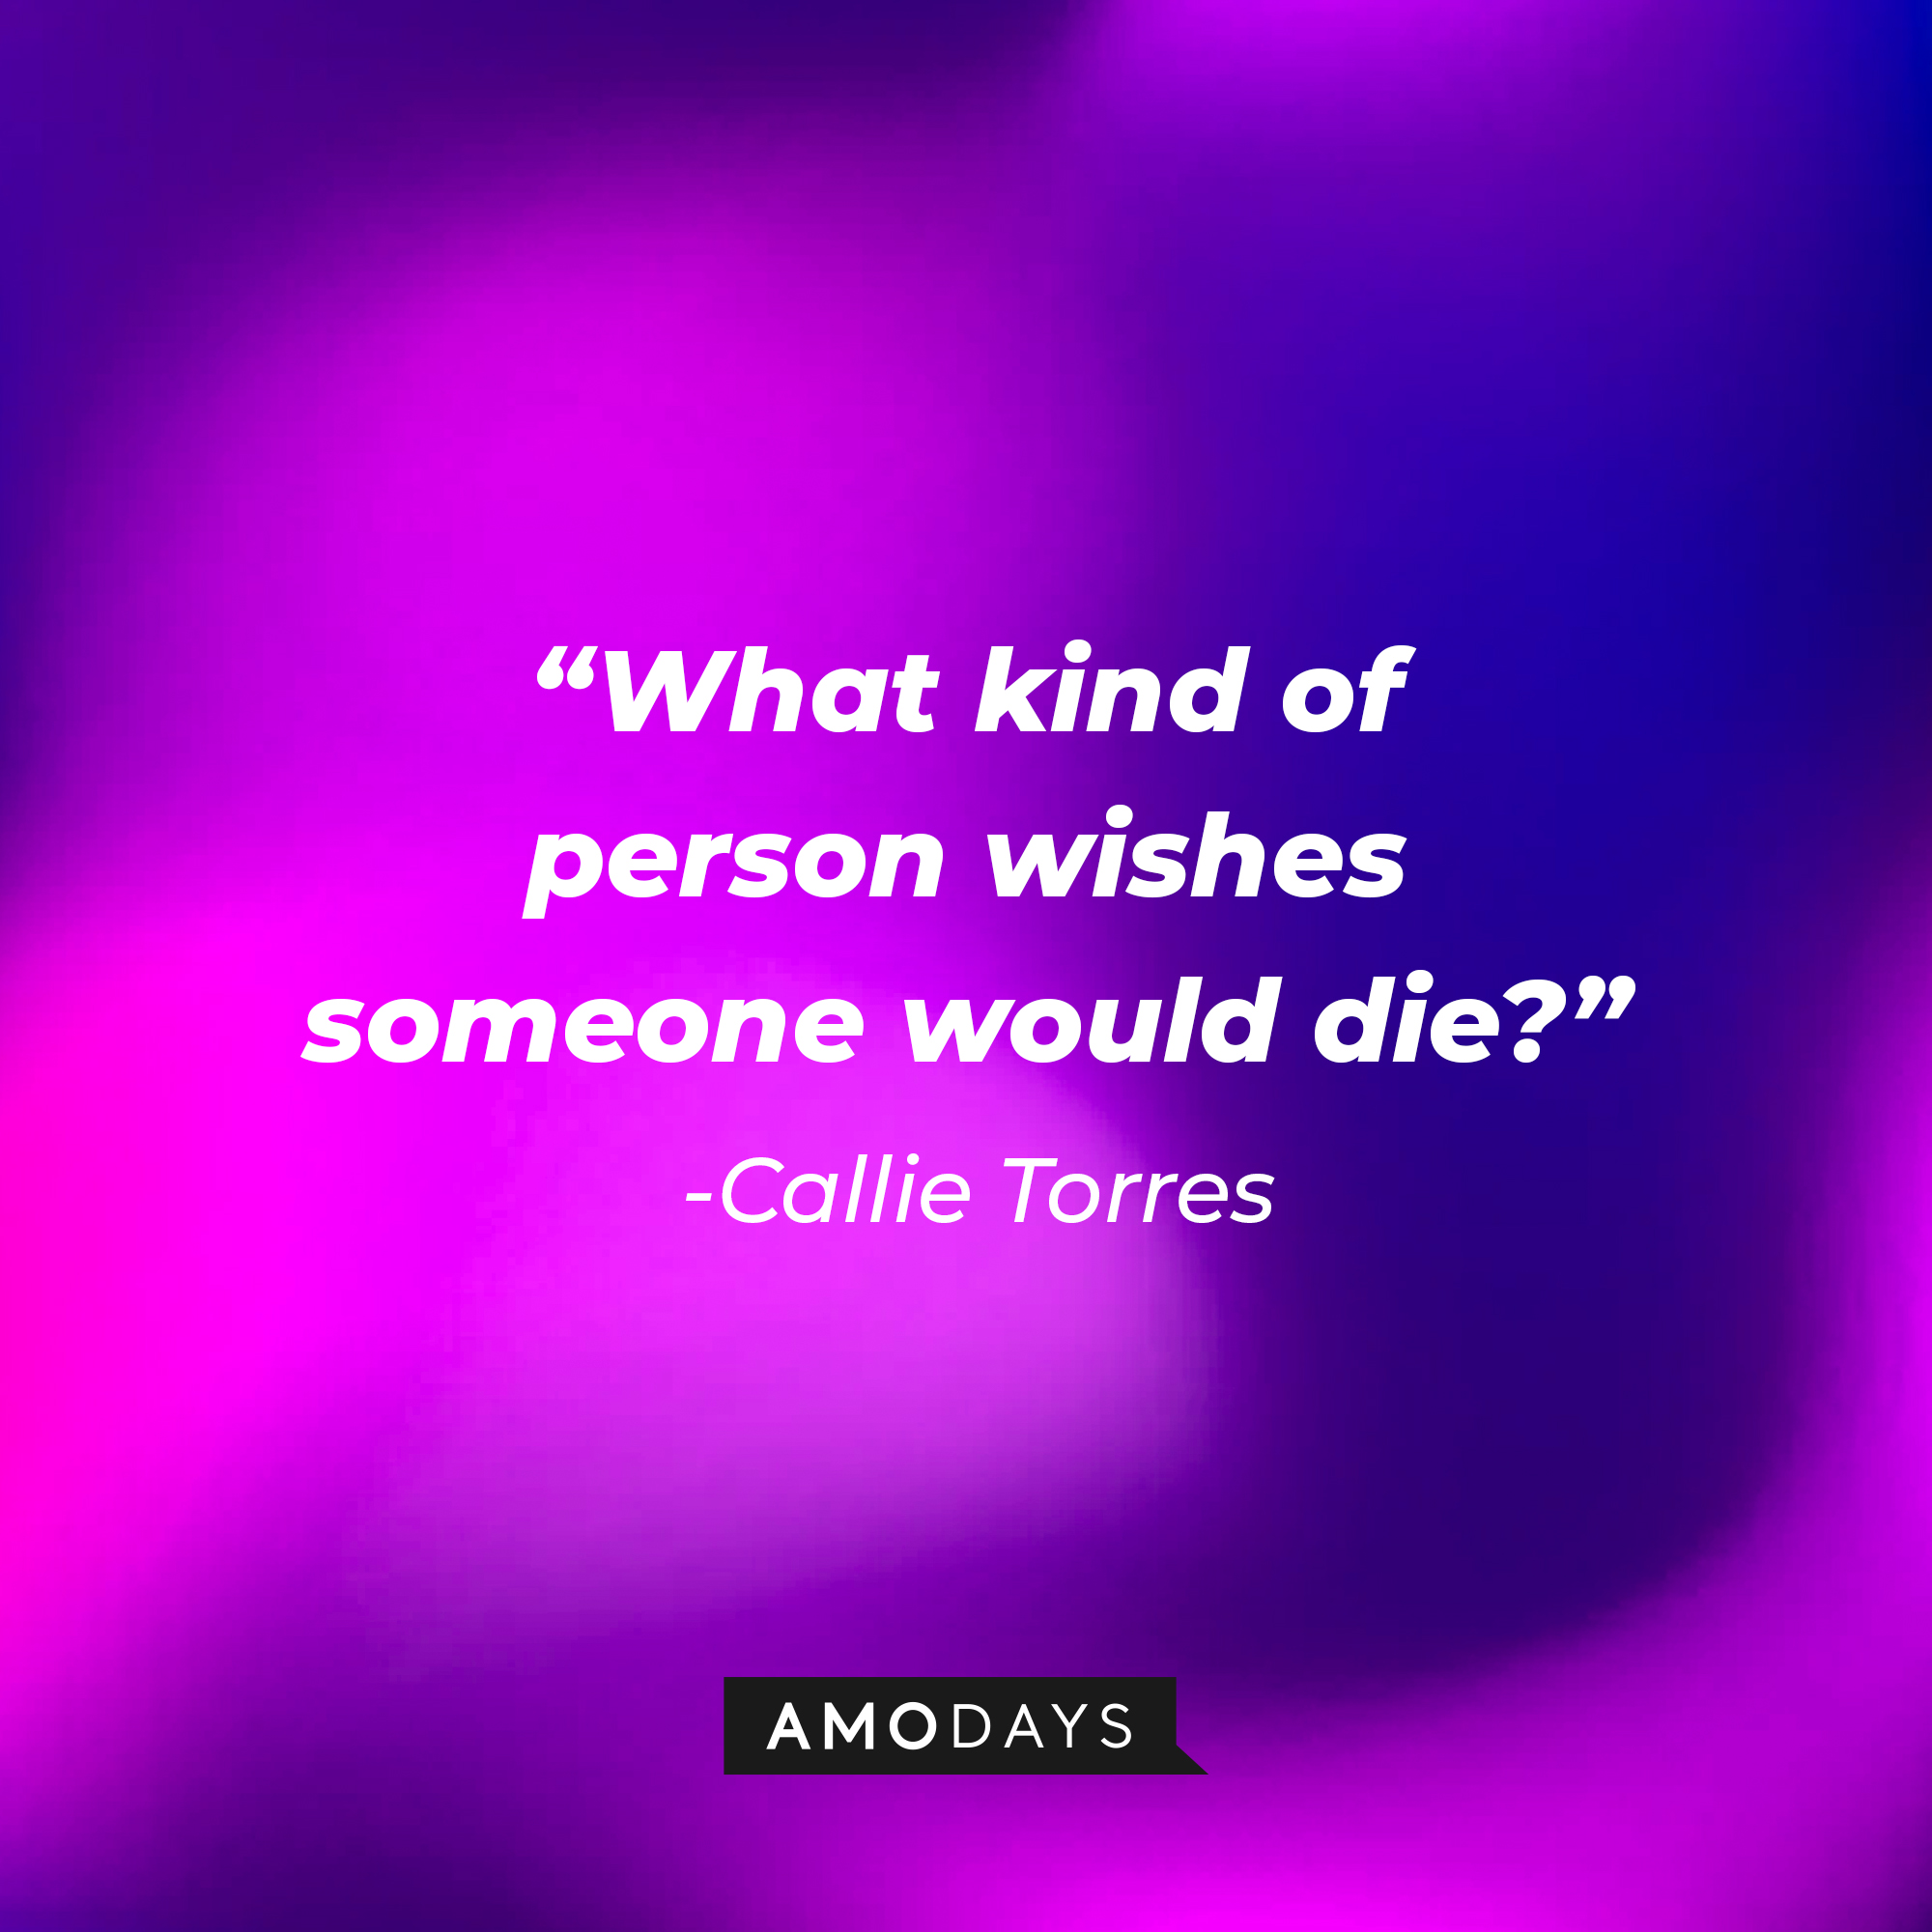 Callie Torres’ quote: "What kind of person wishes someone would die?"  Source: youtube.com/ABCNetwork